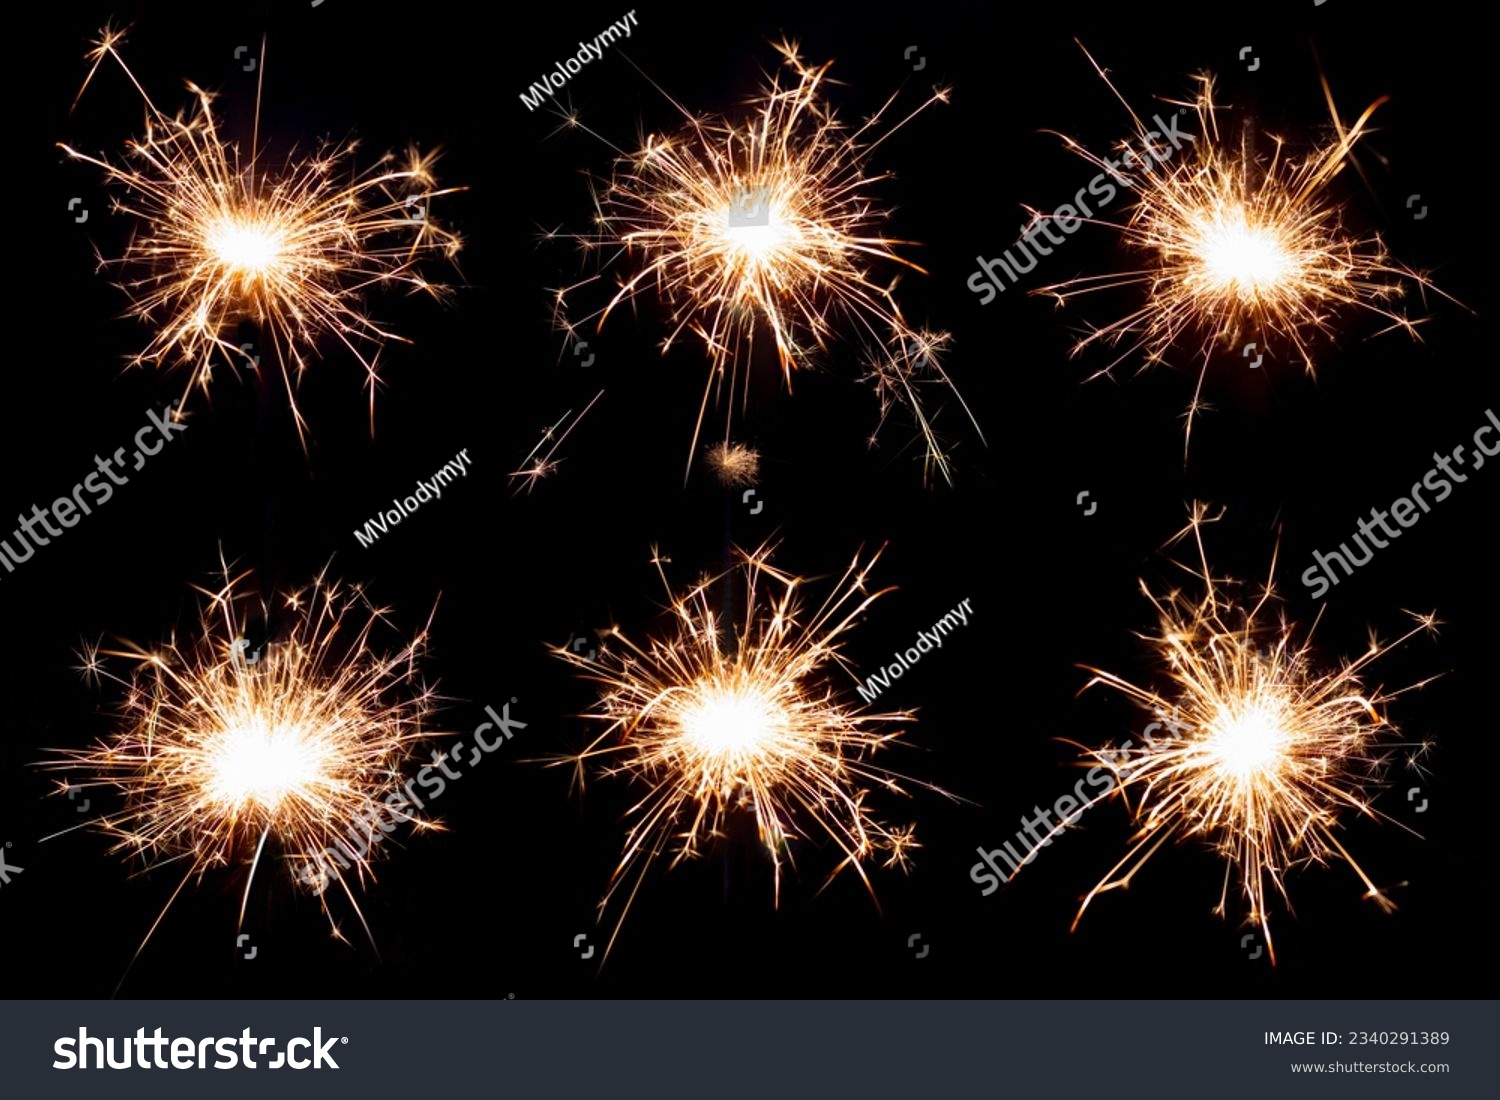 Set of Bengal lights on a black isolated background. Sparks from burning Bengal lights. To insert an image in overlay mode #2340291389